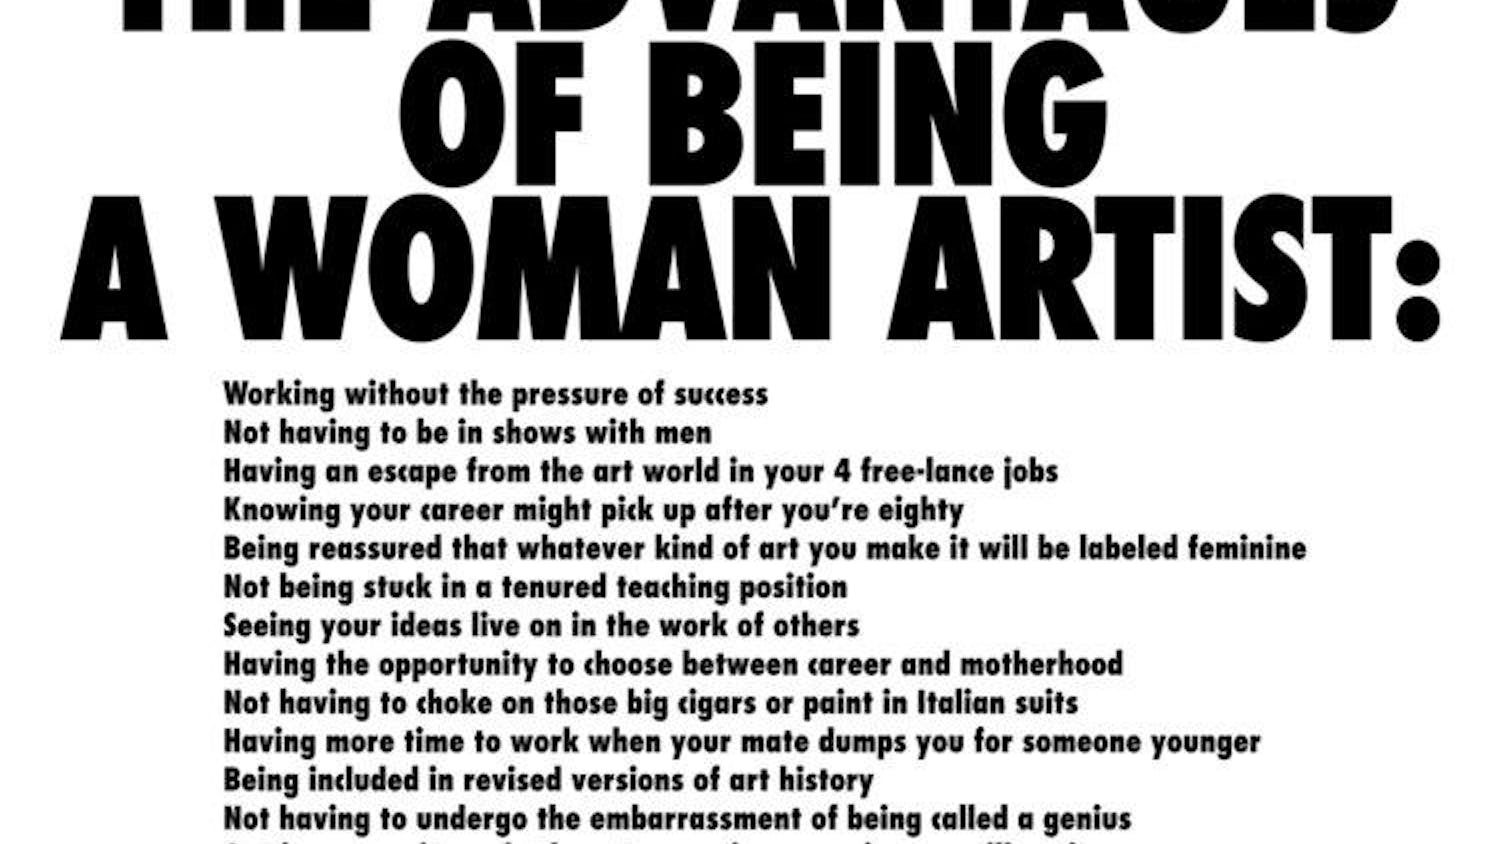 The Advantages of Being a Woman Artist (1988)